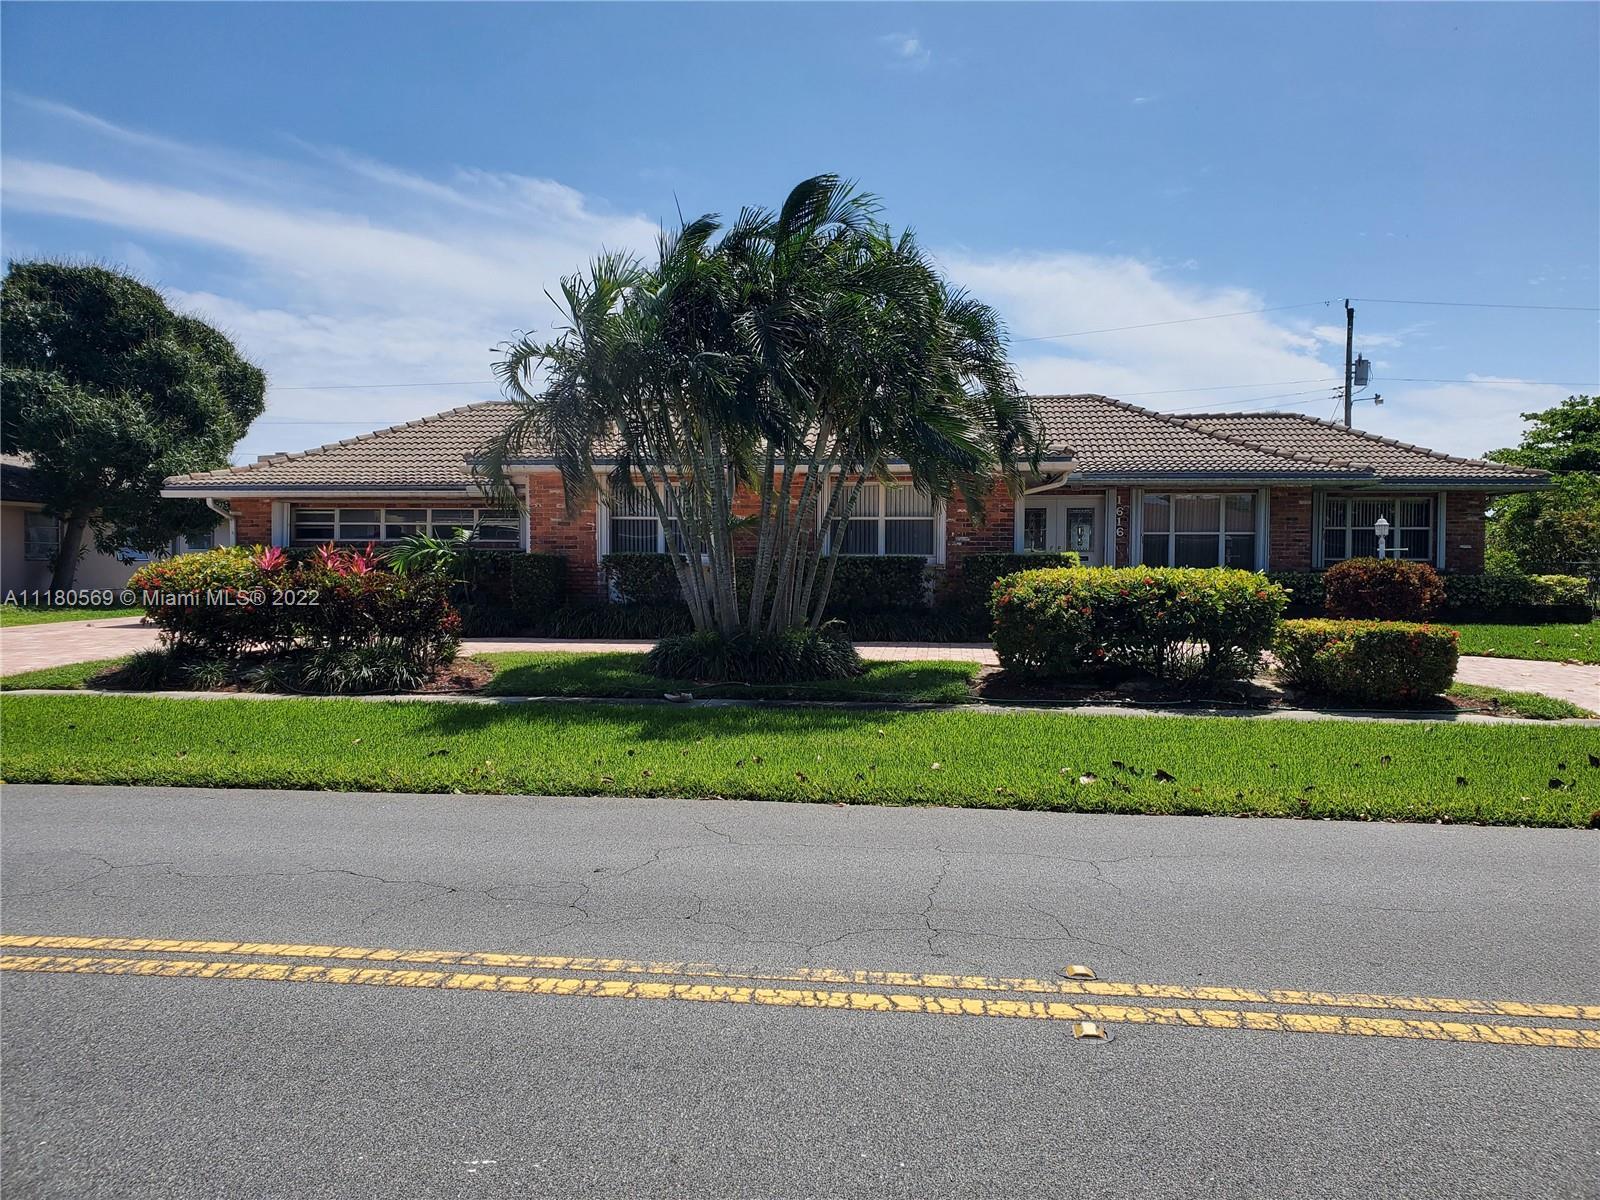 Beautiful Four-bedroom two bath home located in the heart of West Palm Beach. With Spectaculars View